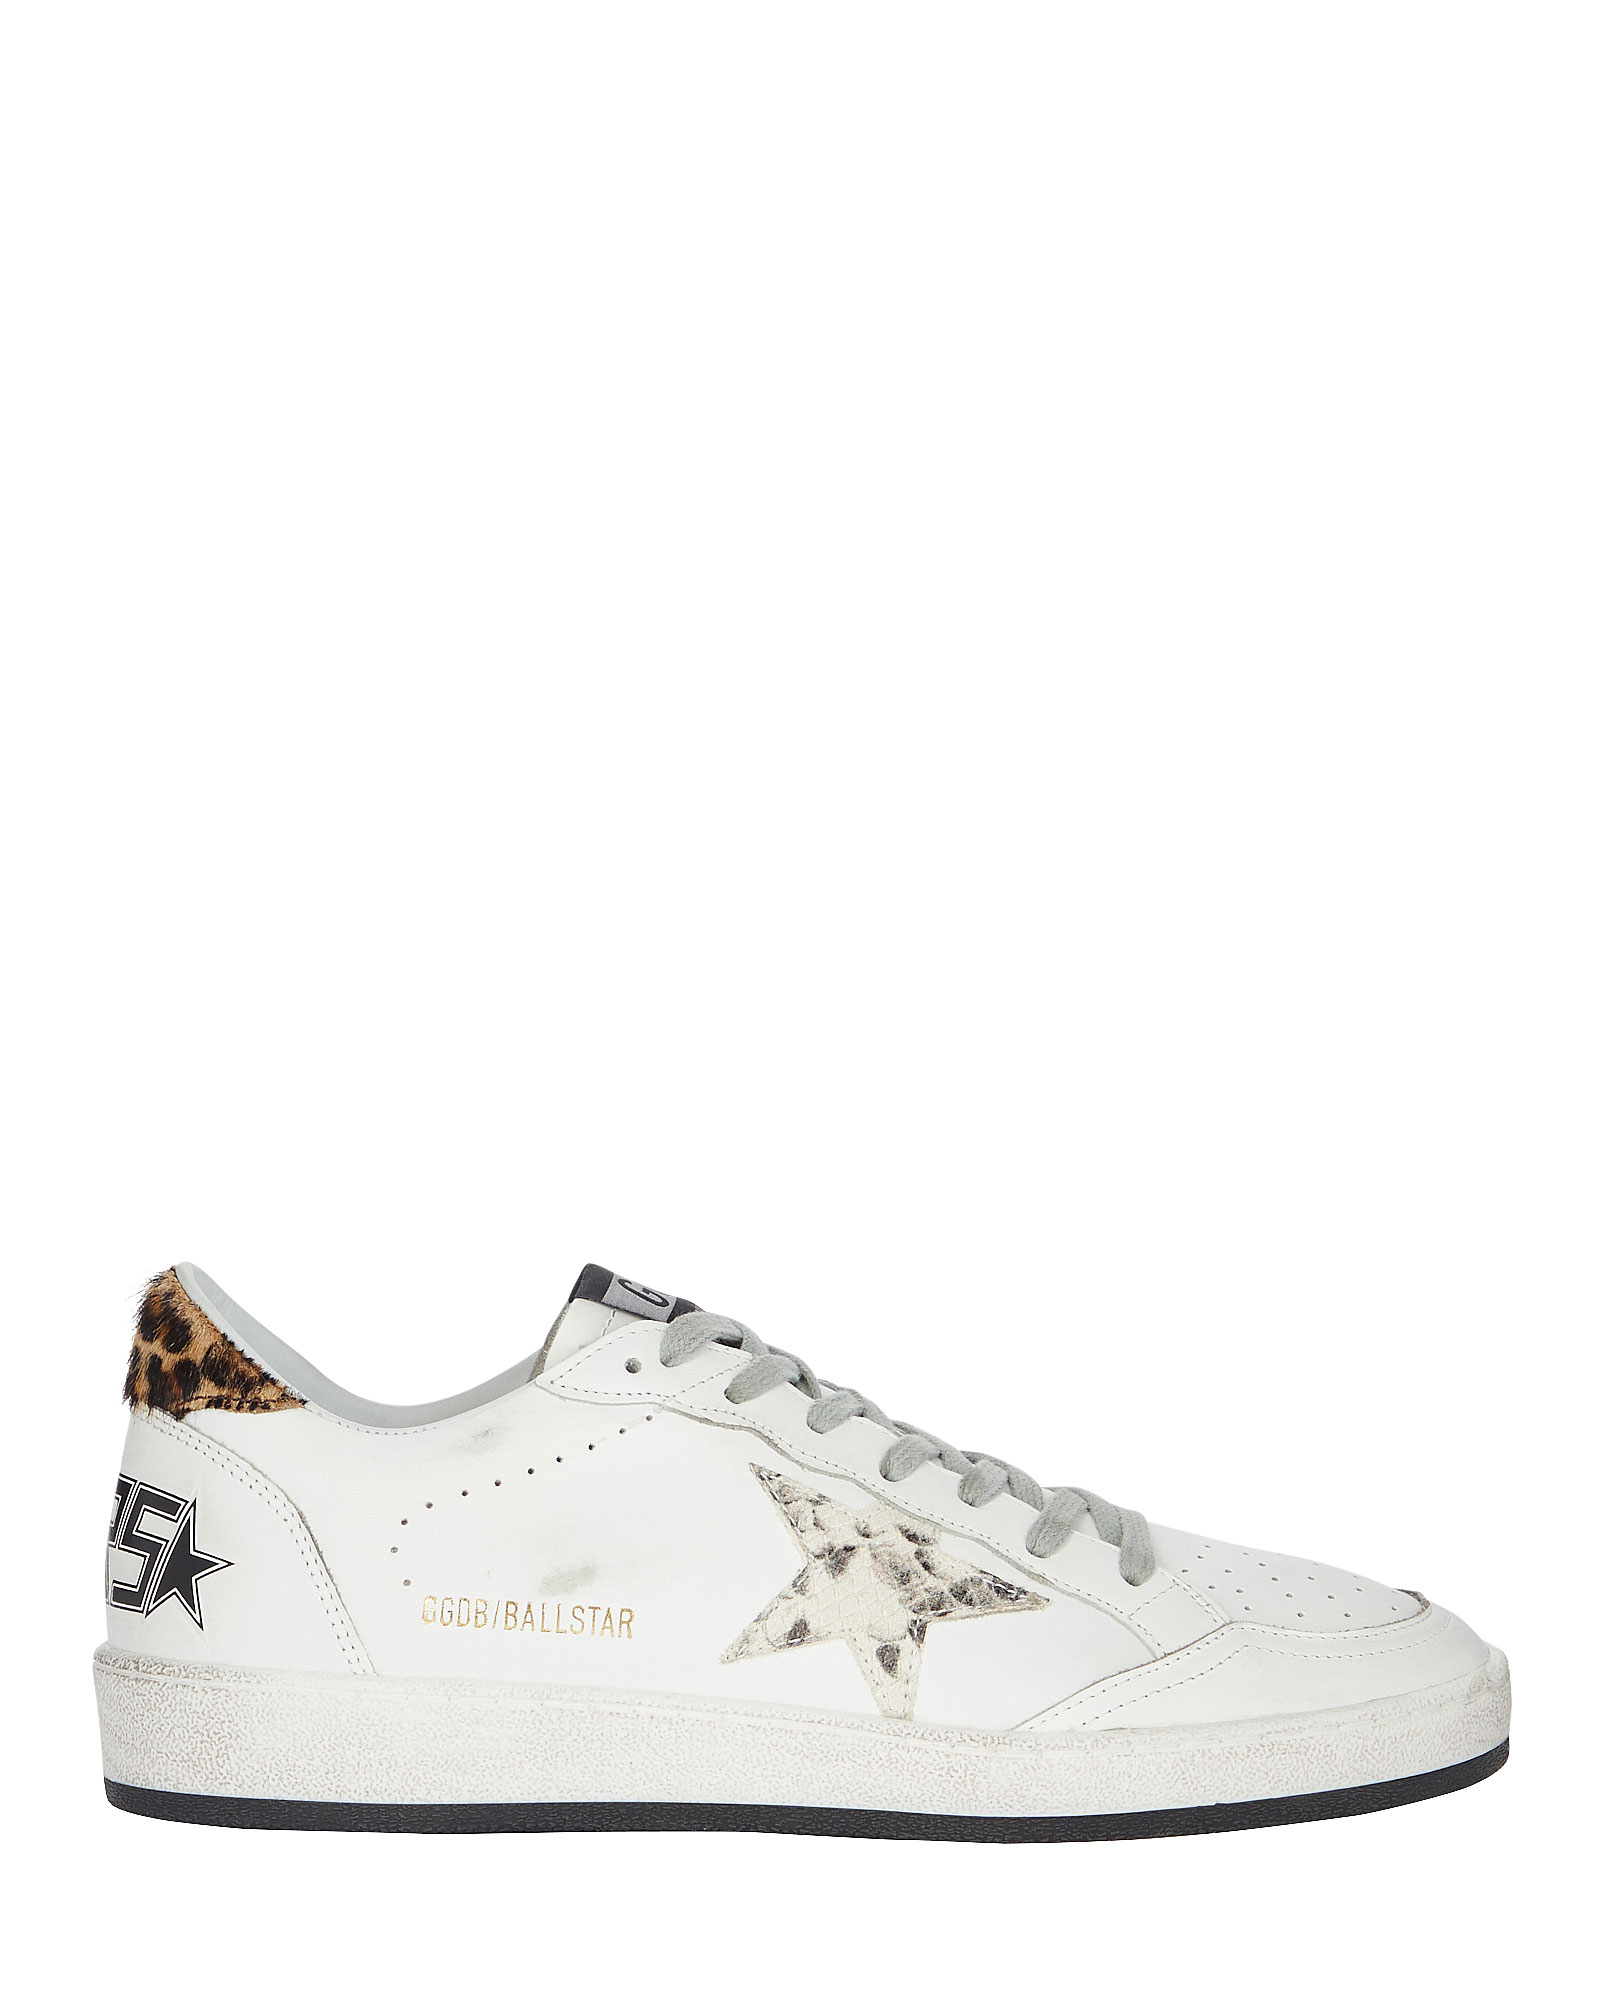 GOLDEN GOOSE BALL STAR LEATHER SNEAKERS,060044254074